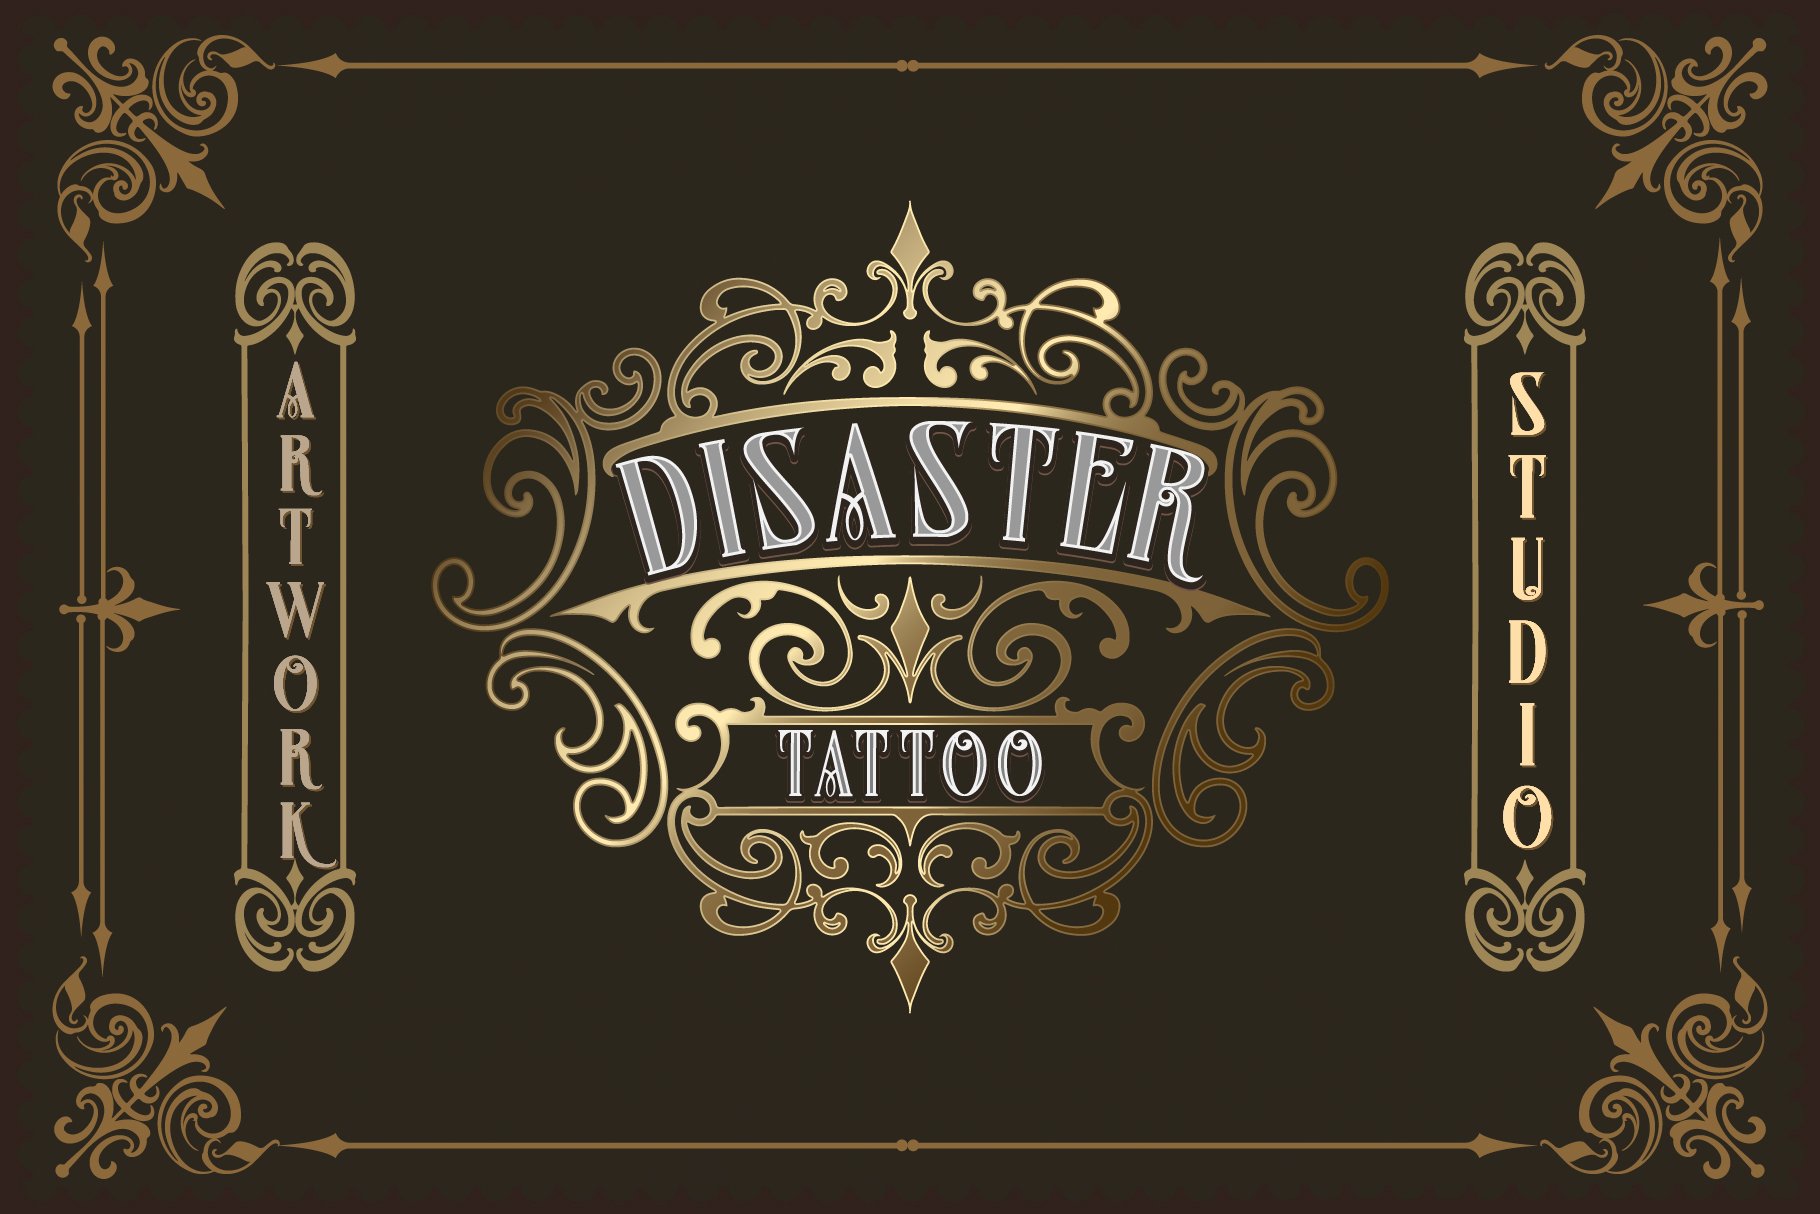 Tattoo Beast + Decorative preview image.